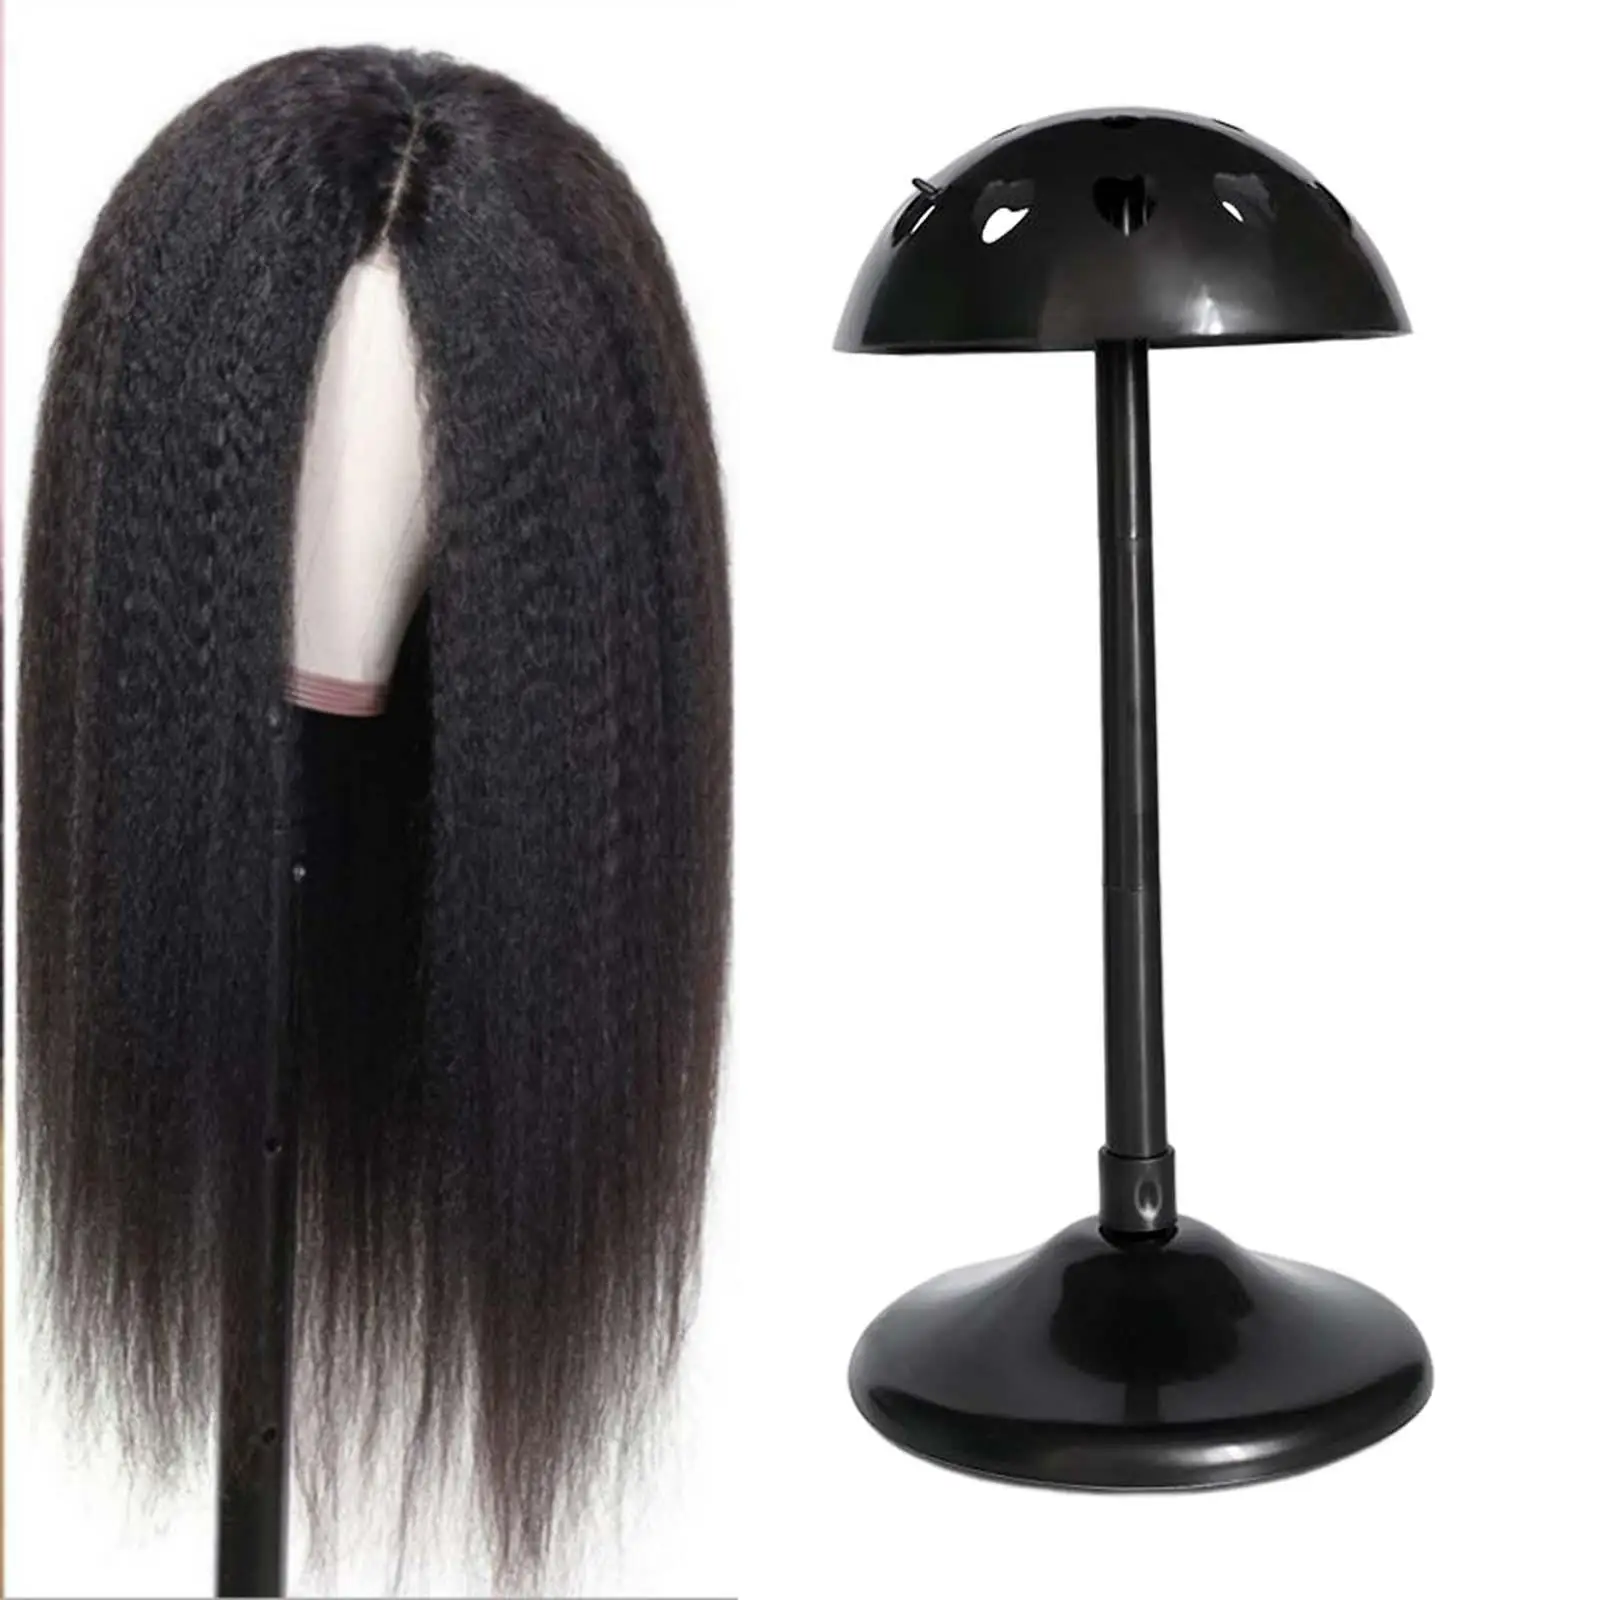 Wig Stand Shelf Removable Design Dome Top Accessories Portable for Hair Styling Drying Hat Storage